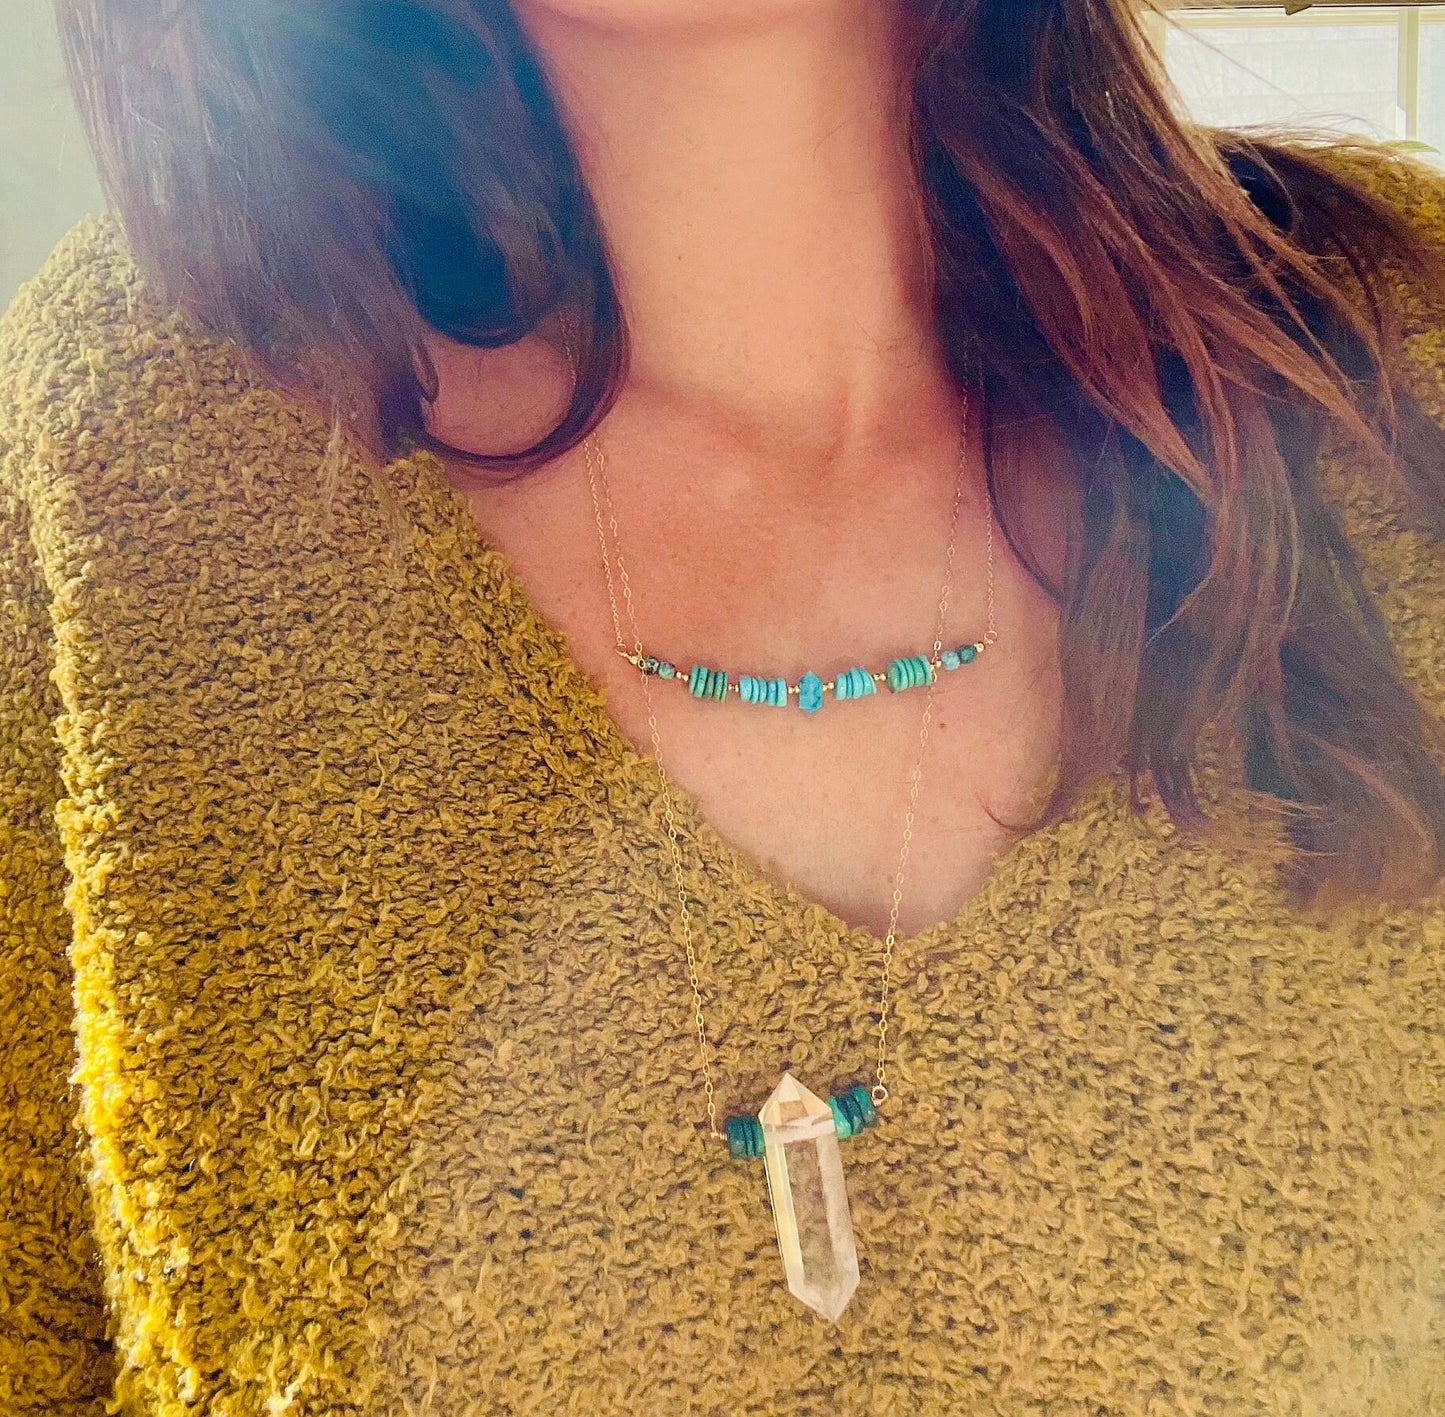 Genuine Bright Blue Turquoise Necklace